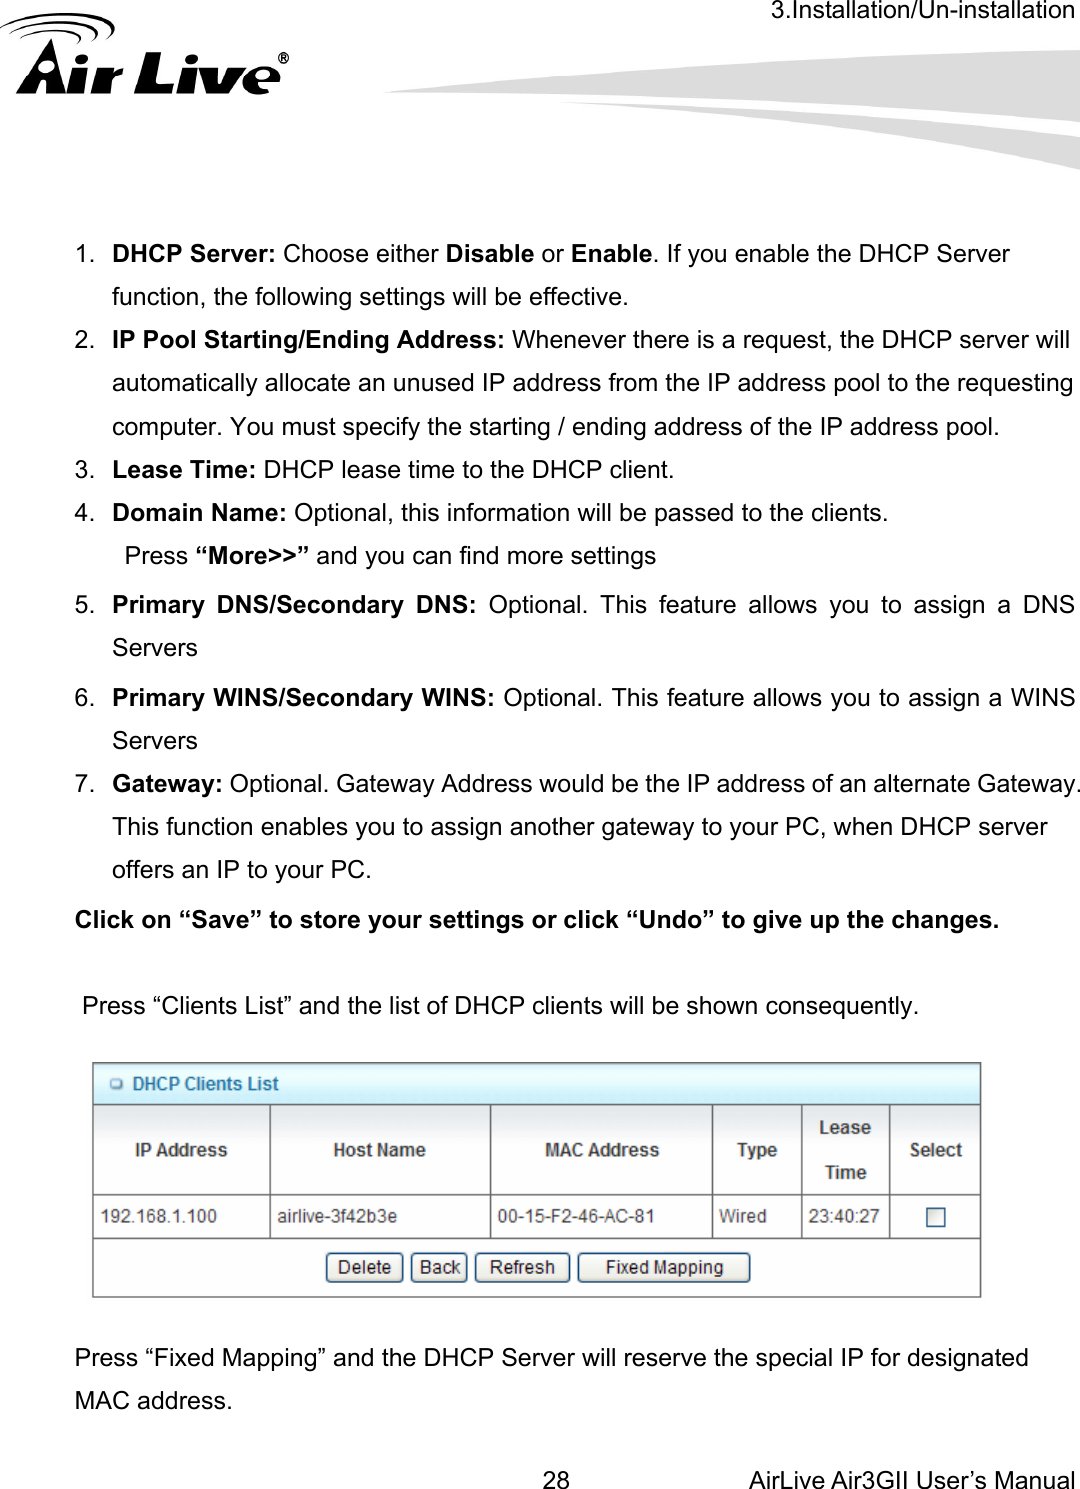 3.Installation/Un-installation AirLive Air3GII User’s Manual 28enable the DHCP Server : DHCP lease time to the DHCP client. ed to the clients. Pre5.  Prim  DNS: Optional. This feature allows you to assign a DNS Serv6.  Prim ndary WINS: Optional. This feature allows you to assign a WINS Serv7.  Gate uld be the IP address of an alternate Gateway. Click on “Save” to store your settings or click “Undo” to give up the changes. Press “Clients List” and the list of DHCP clients will be shown consequently.                 1.  DHCP Server: Choose either Disable or Enable. If you function, the following settings will be effective. 2.  IP Pool Starting/Ending Address: Whenever there is a request, the DHCP server will automatically allocate an unused IP address from the IP address pool to the requesting computer. You must specify the starting / ending address of the IP address pool. 3.  Lease Time4.  Domain Name: Optional, this information will be passss “More&gt;&gt;” and you can find more settings ary DNS/Secondaryers ary WINS/Secoers way: Optional. Gateway Address woThis function enables you to assign another gateway to your PC, when DHCP server offers an IP to your PC.    Press “Fixed Mapping” and the DHCP Server will reserve the special IP for designated MAC address. 